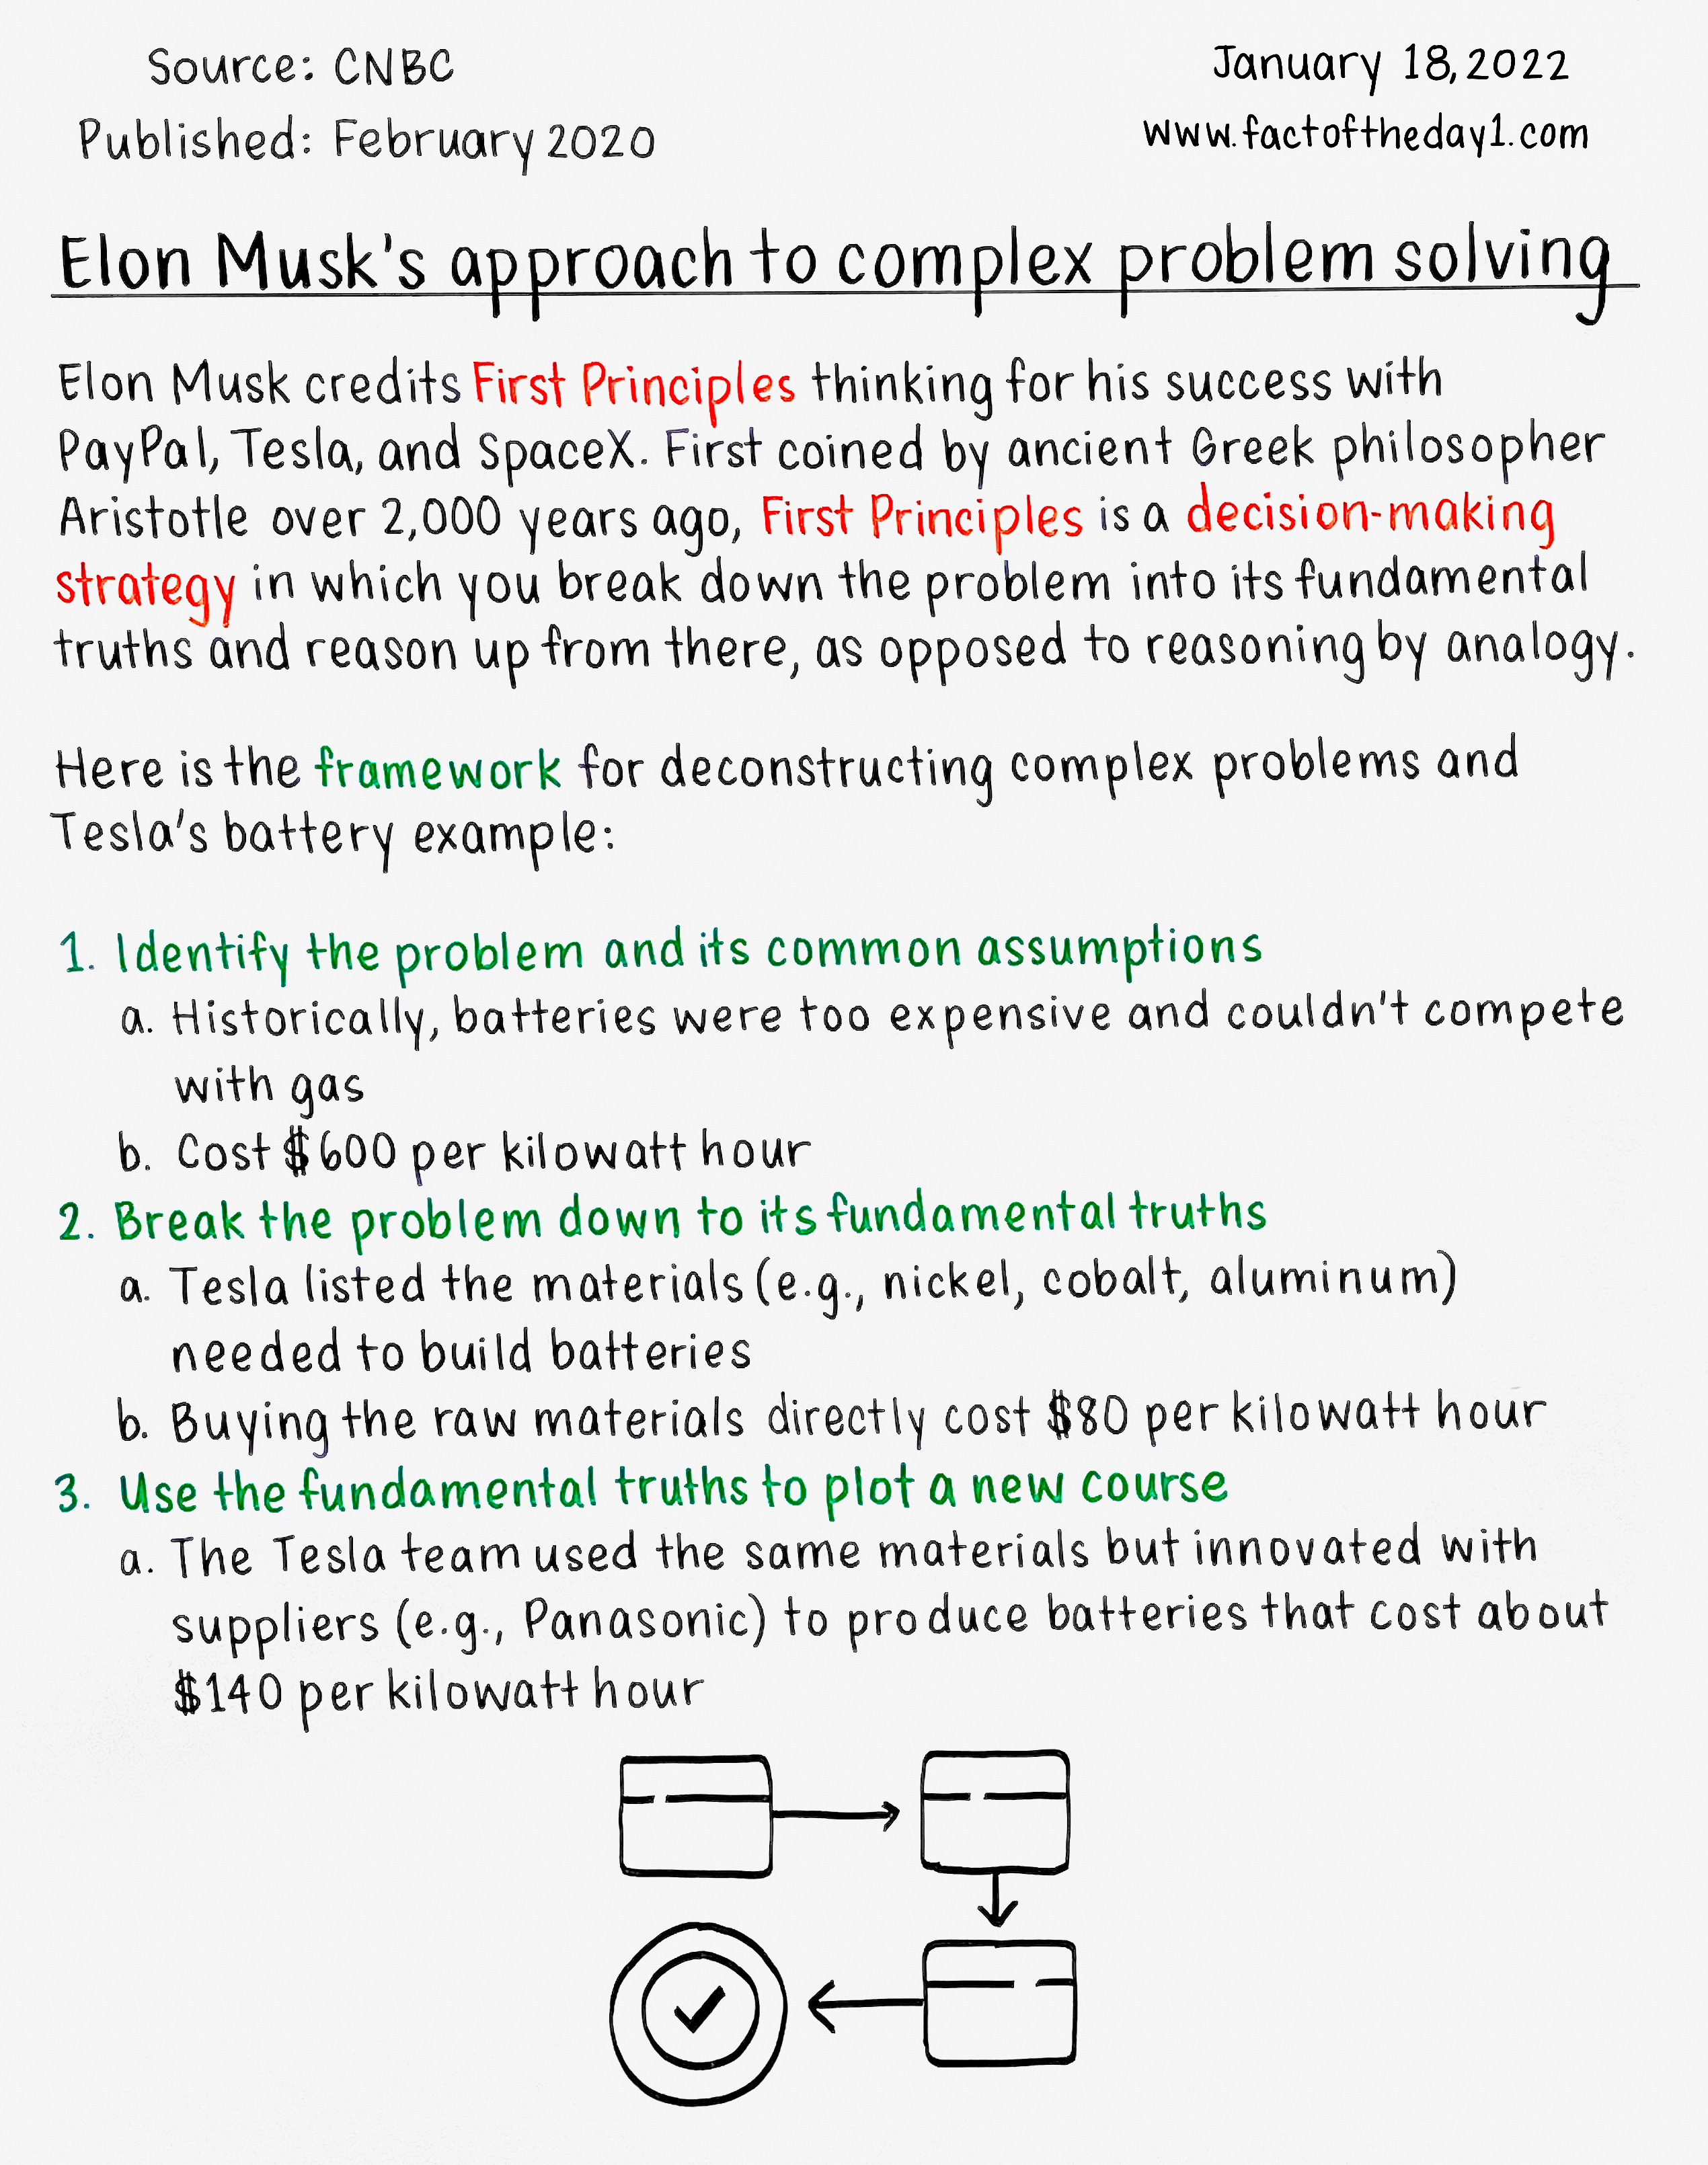 January 18: Elon Musk's approach to complex problem solving